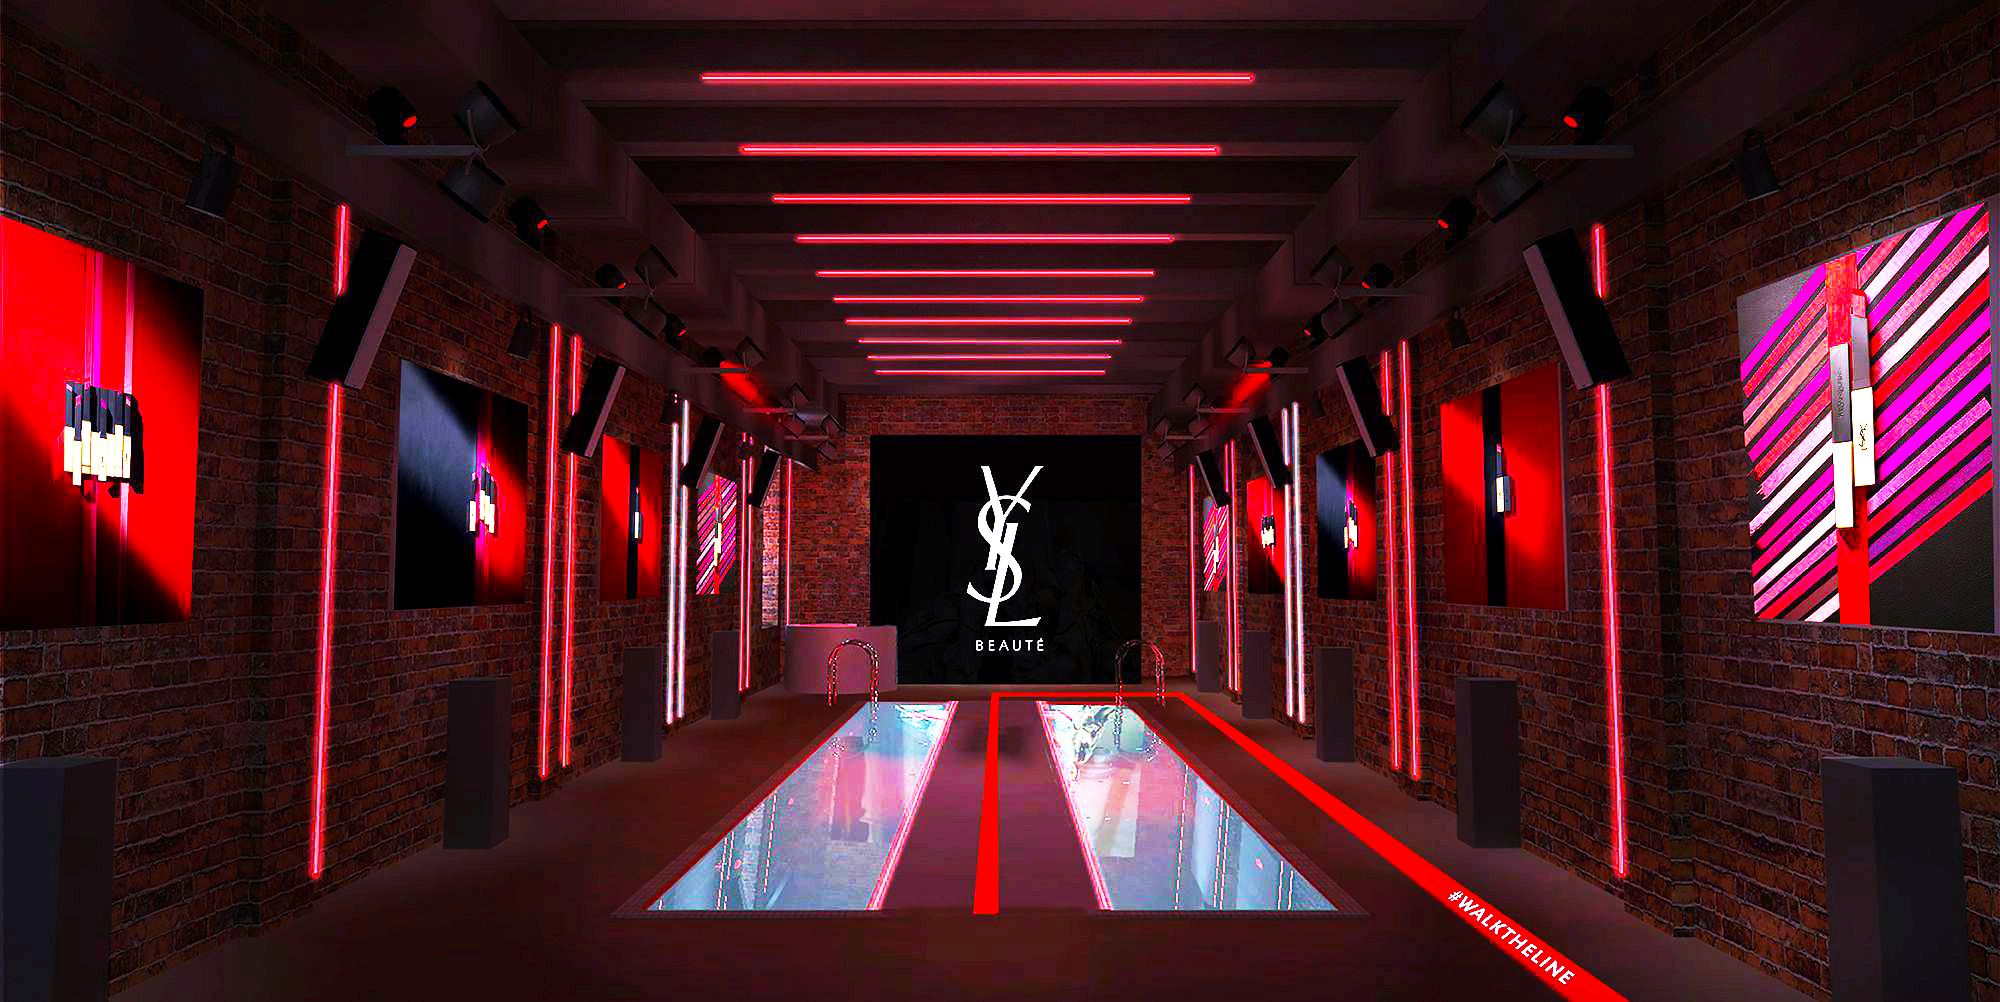 Ysl S Beauty Hotel Is Coming To New York Ysl Beauty To Launch Pop Up In Nyc